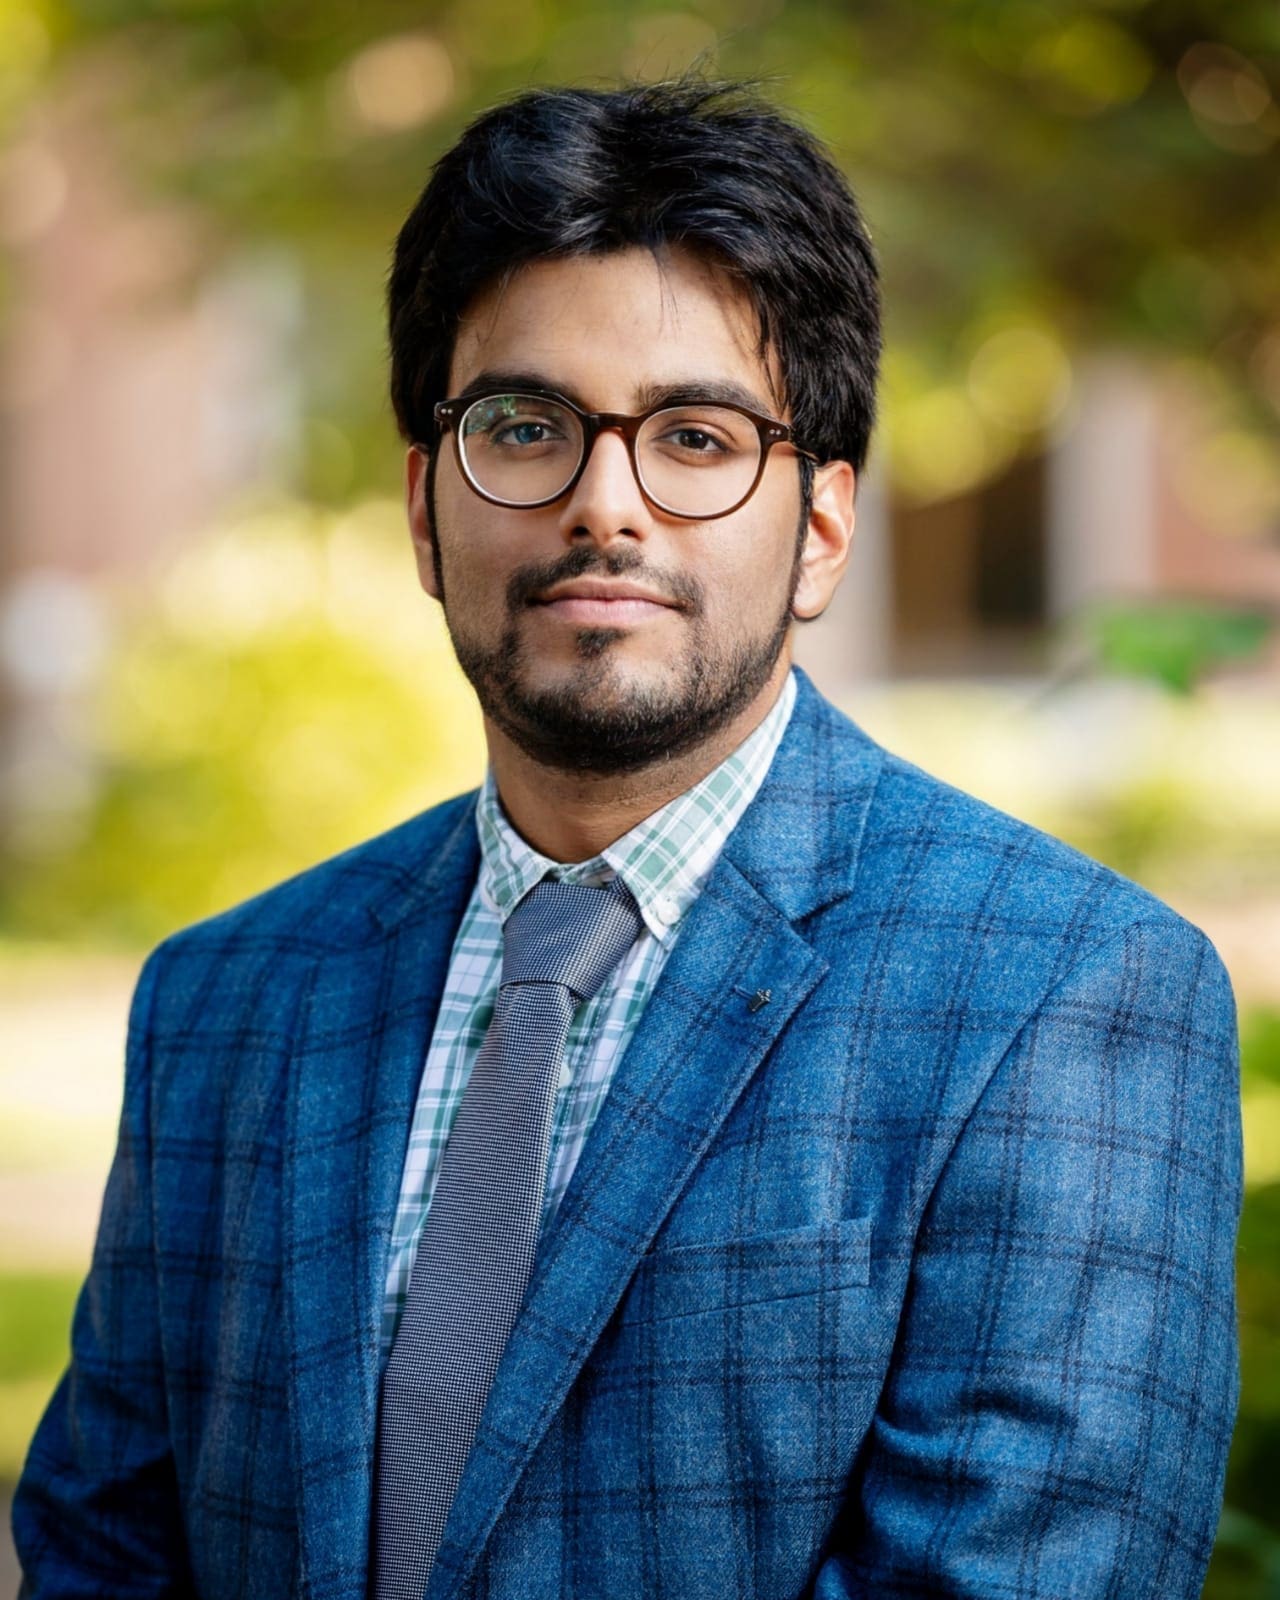 Job Market Candidate Aniruddha Ghosh’s paper accepted at Journal of Economic Theory